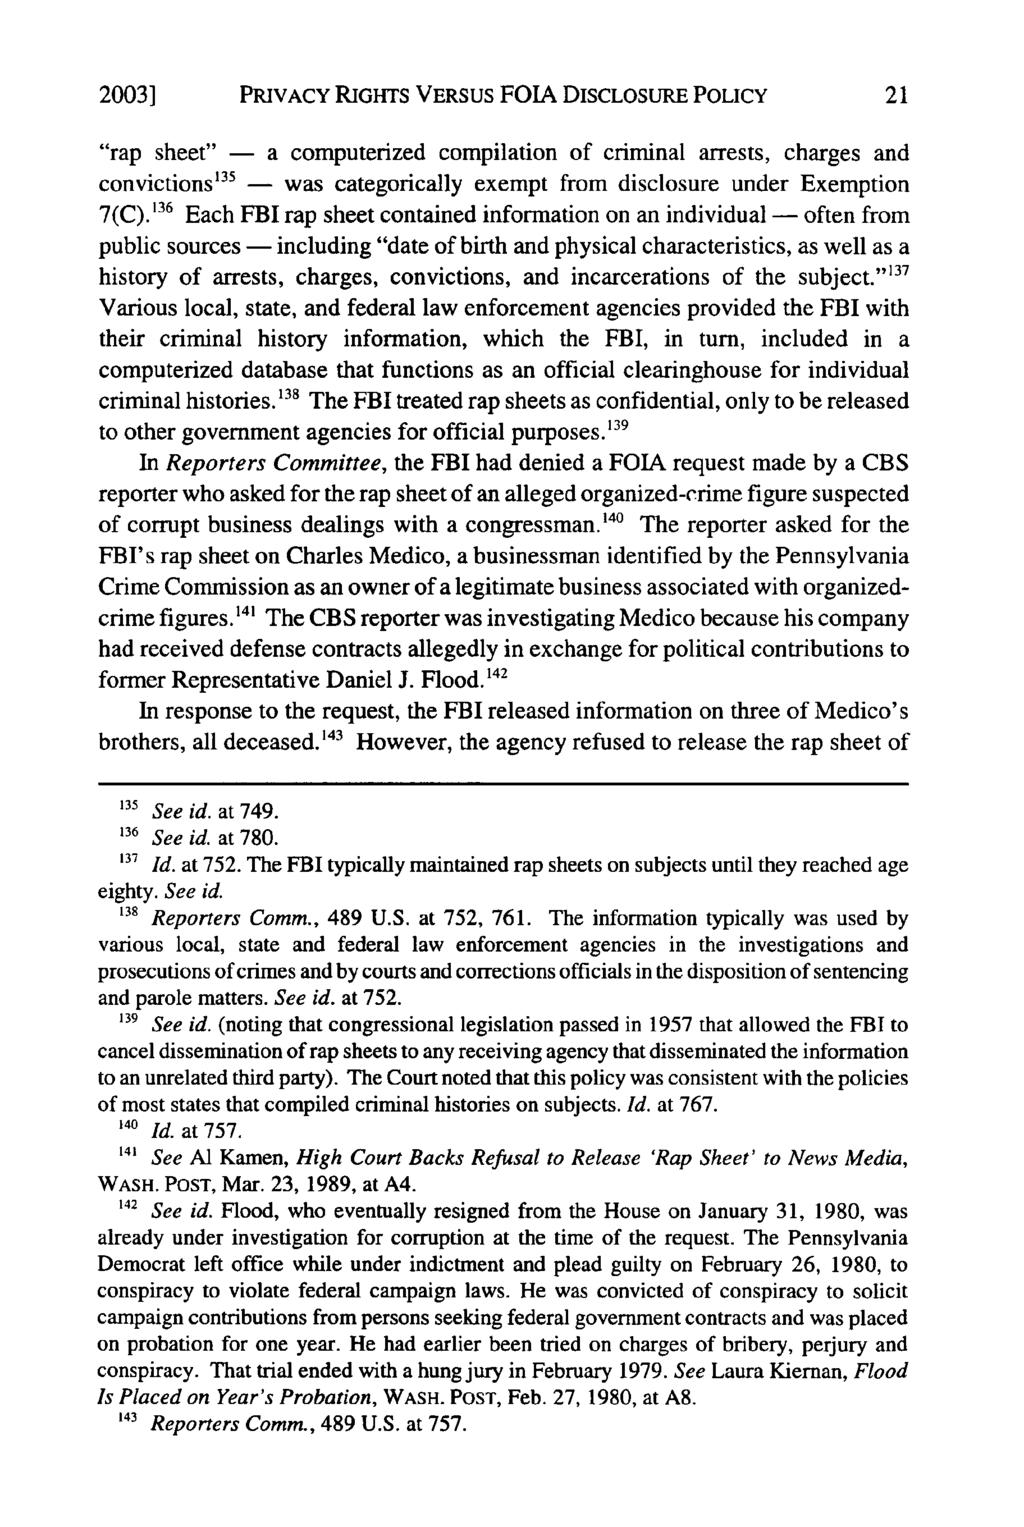 2003] PRIVACY RIGHTS VERSUS FOIA DISCLOSURE POLICY "rap sheet" - a computerized compilation of criminal arrests, charges and convictions 3 ' - was categorically exempt from disclosure under Exemption